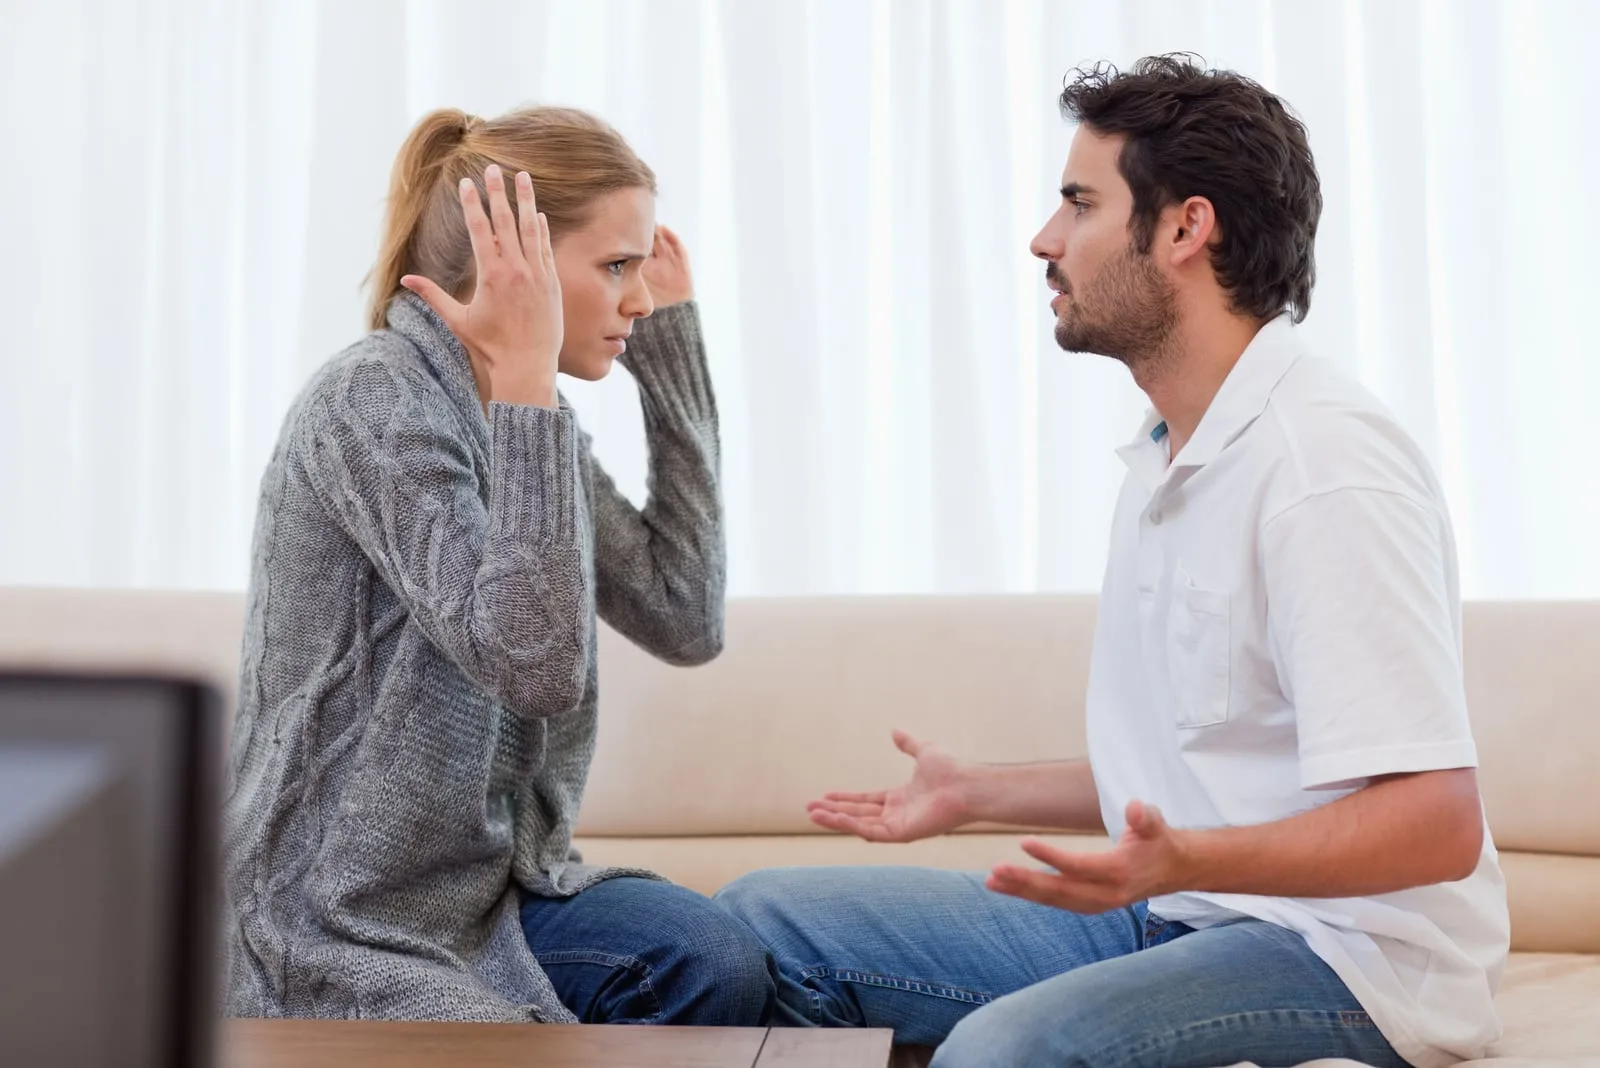 angry blond woman arguing with man on the couch